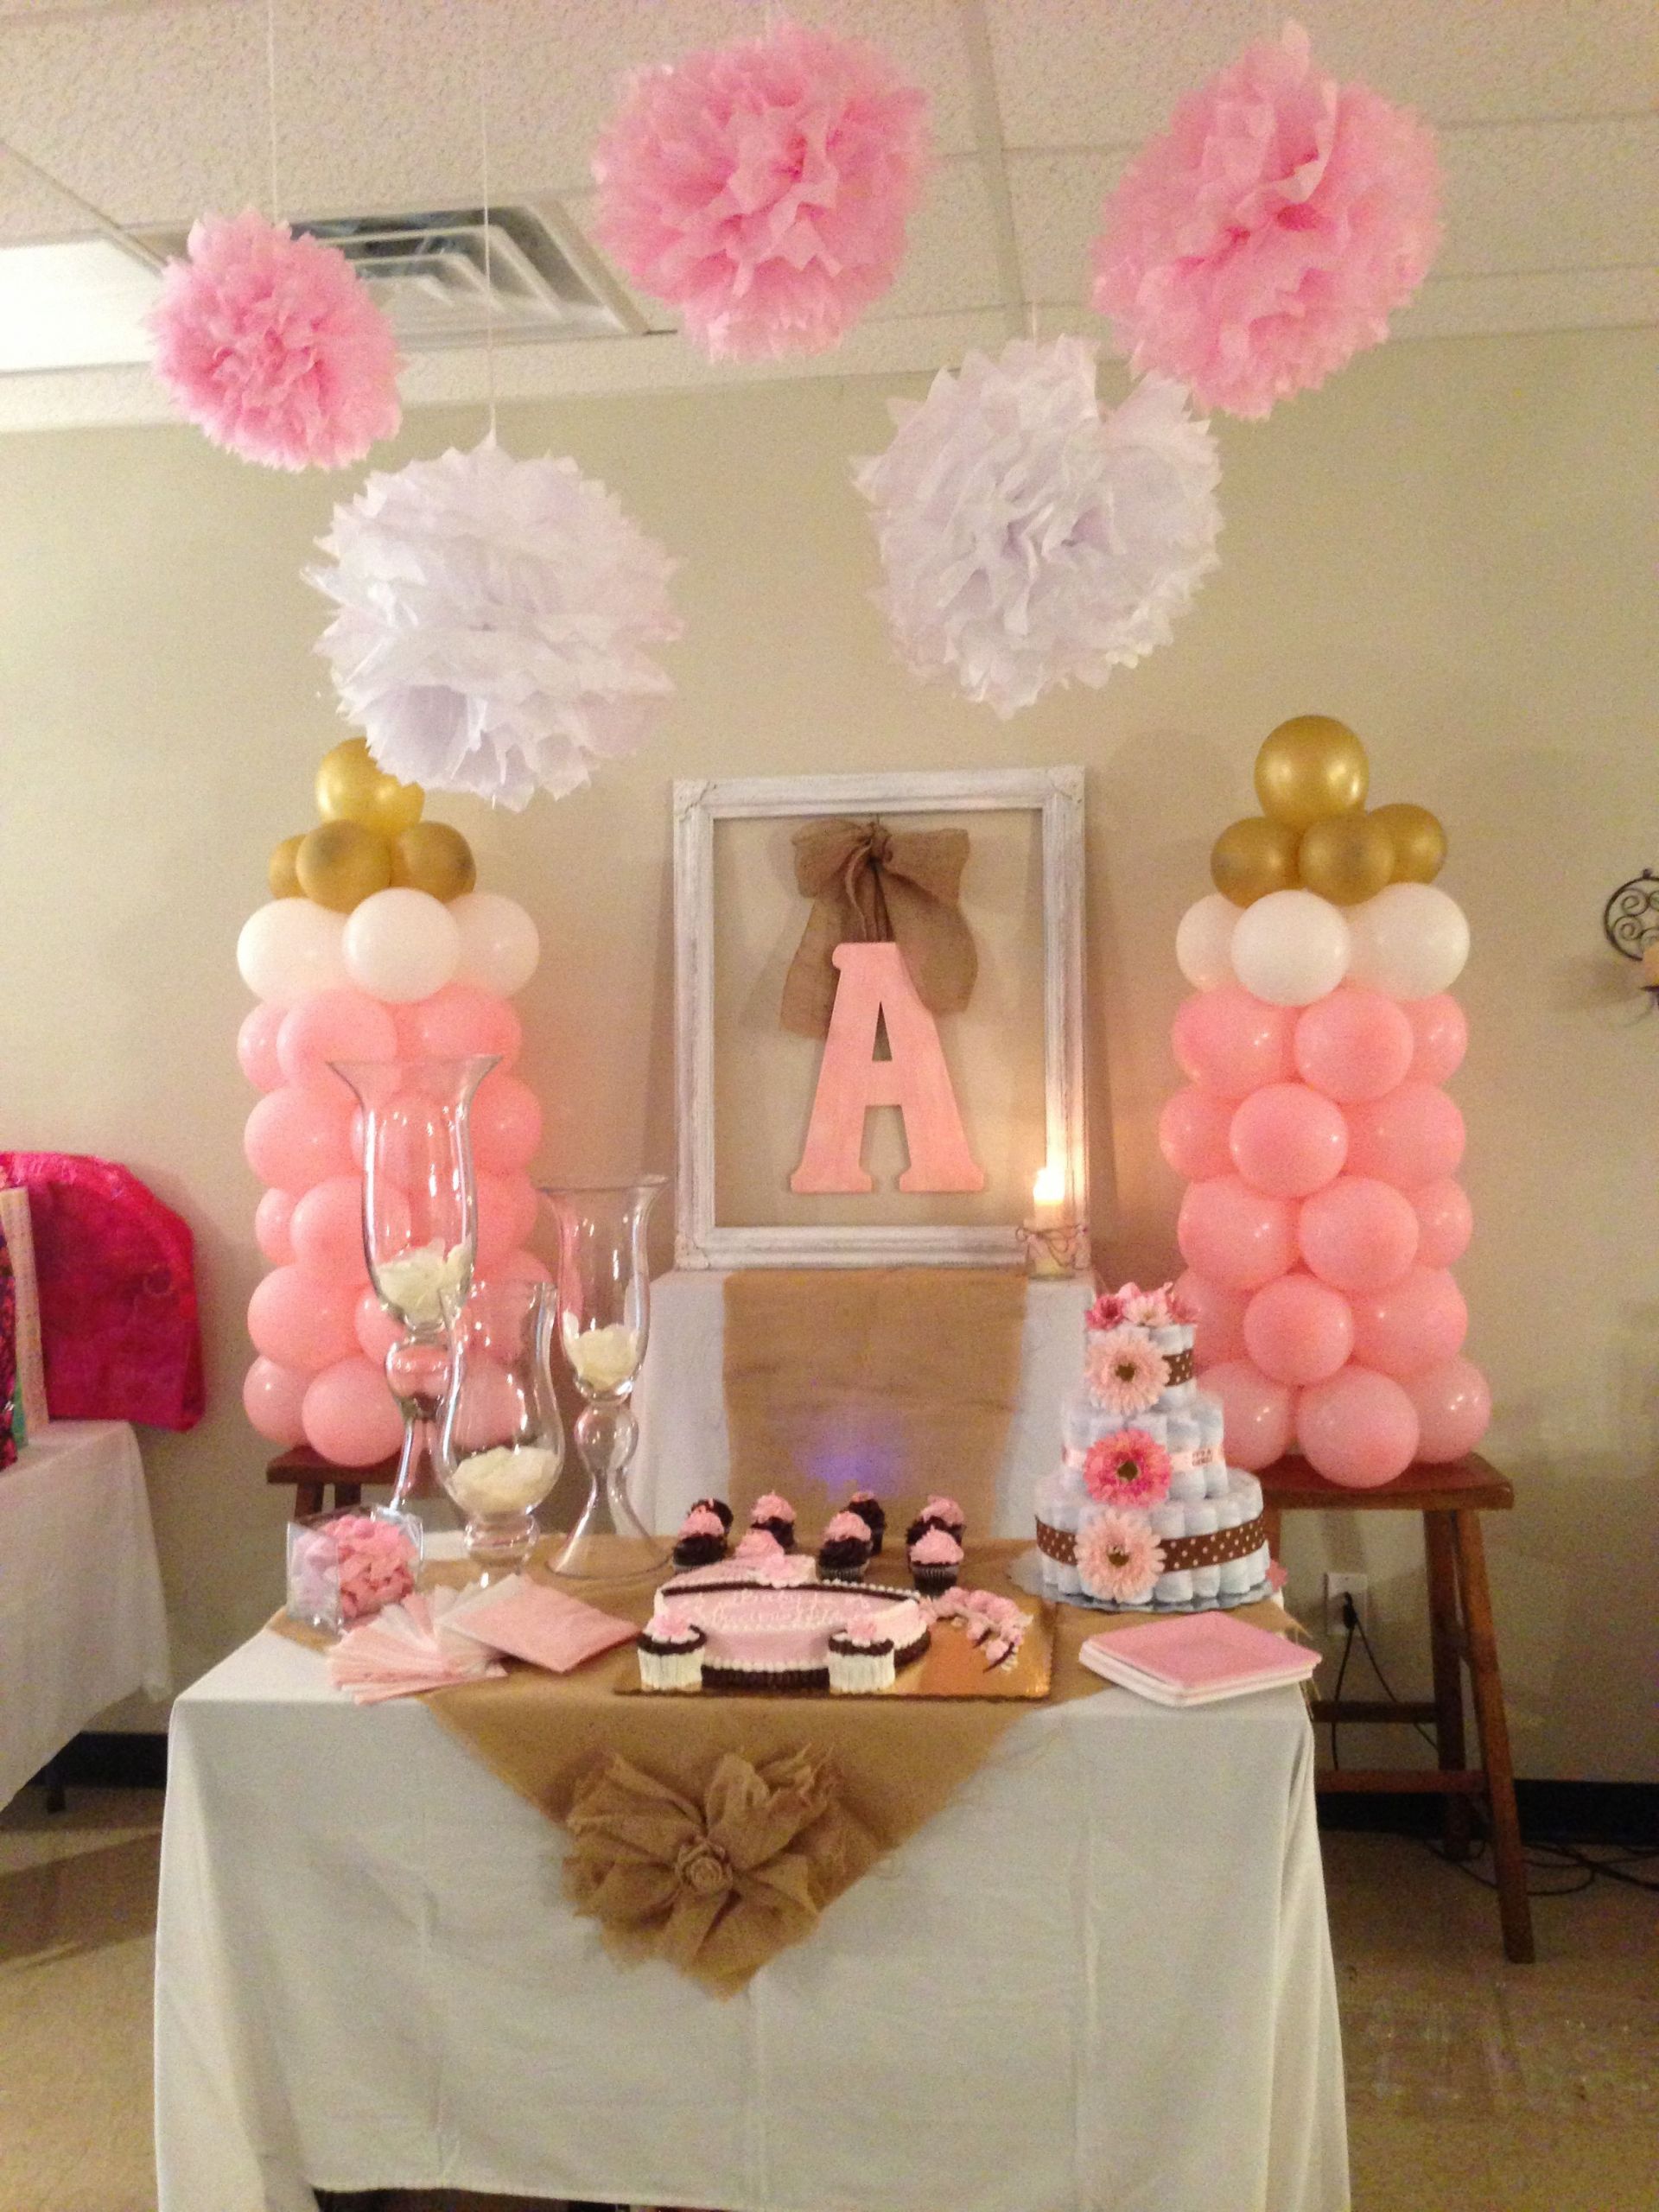 Girl Baby Shower Decorating Ideas
 Girl baby shower decorations